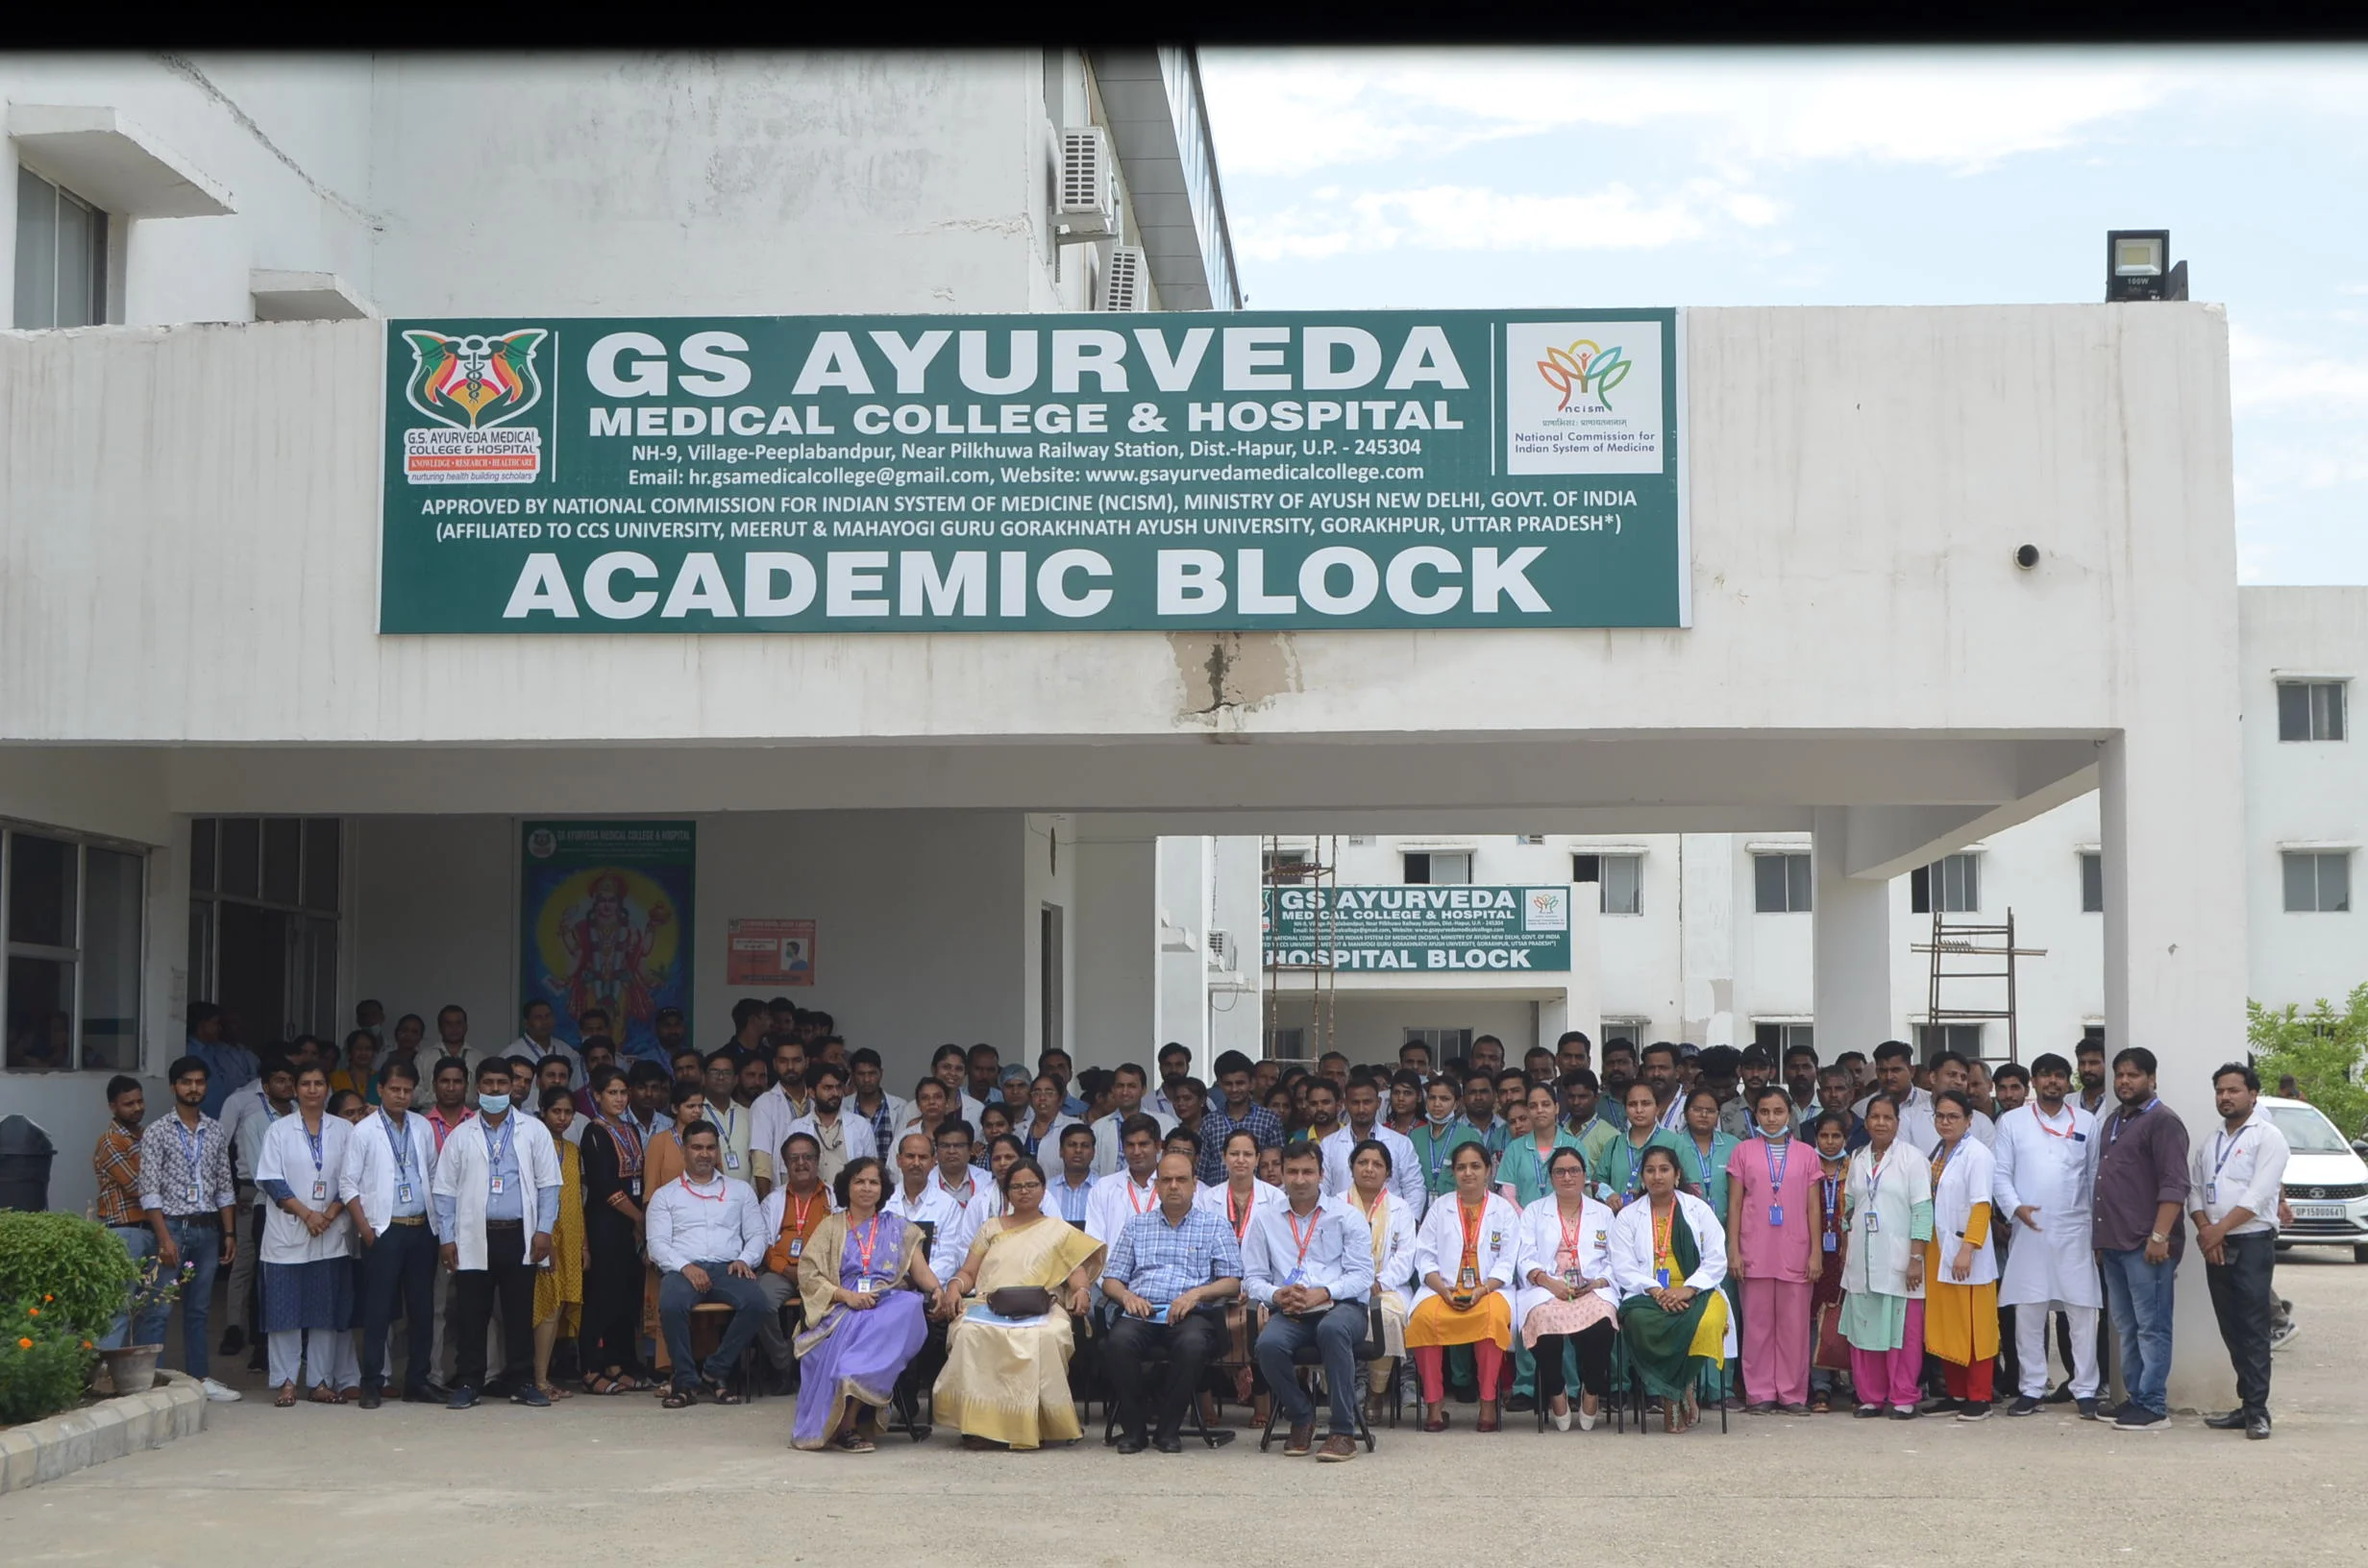 All Doctors and Staffs of GS Ayurveda Medical College & Hospital